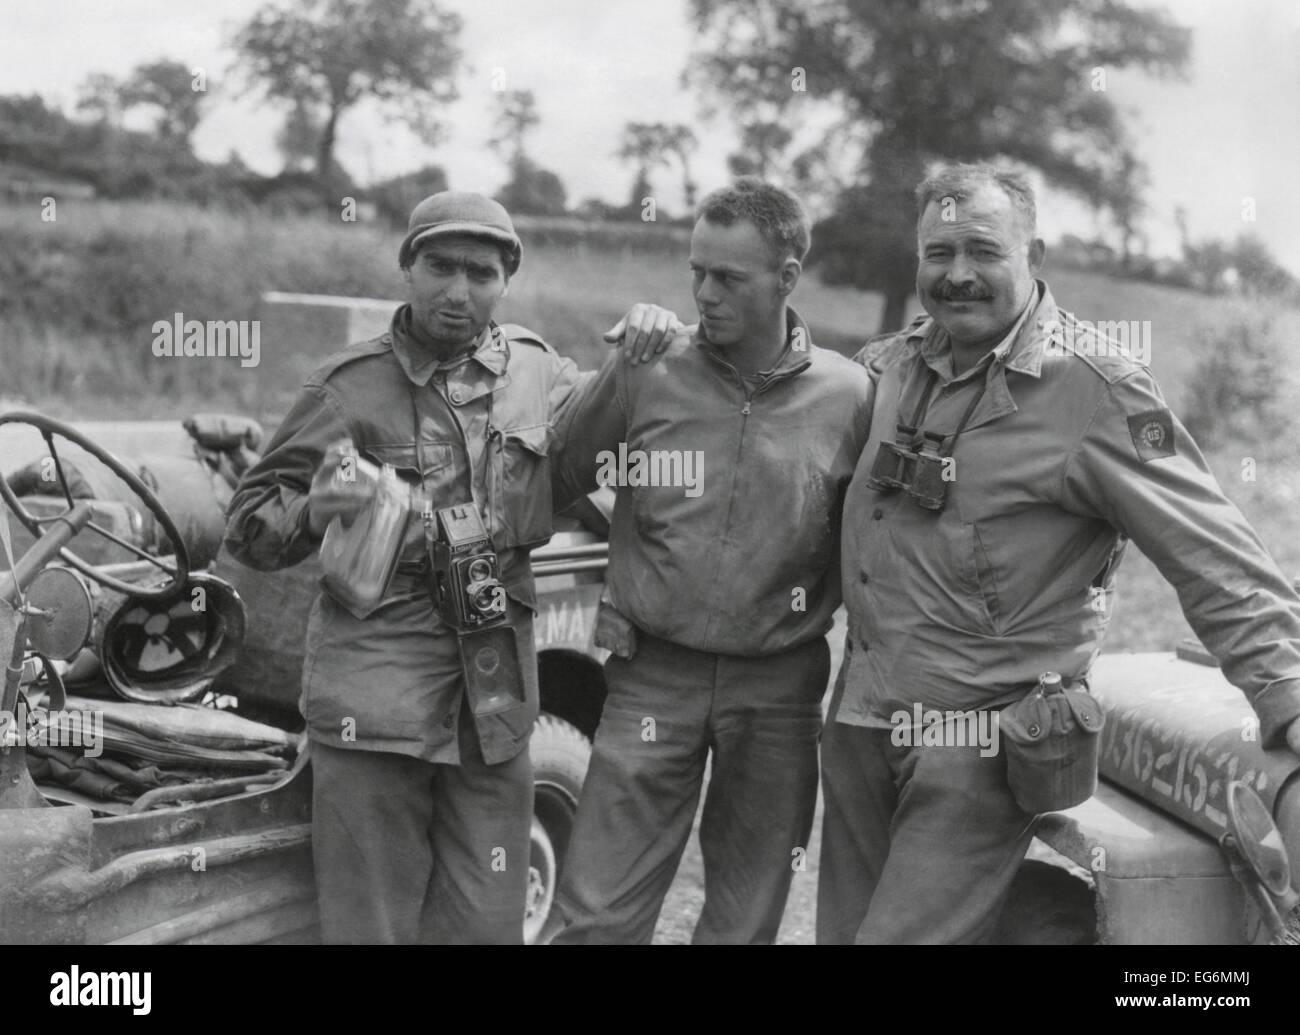 Robert Capa (left) and Ernest Hemingway (right) with their driver U.S. Army  driver. They are waiting to follow an American Stock Photo - Alamy